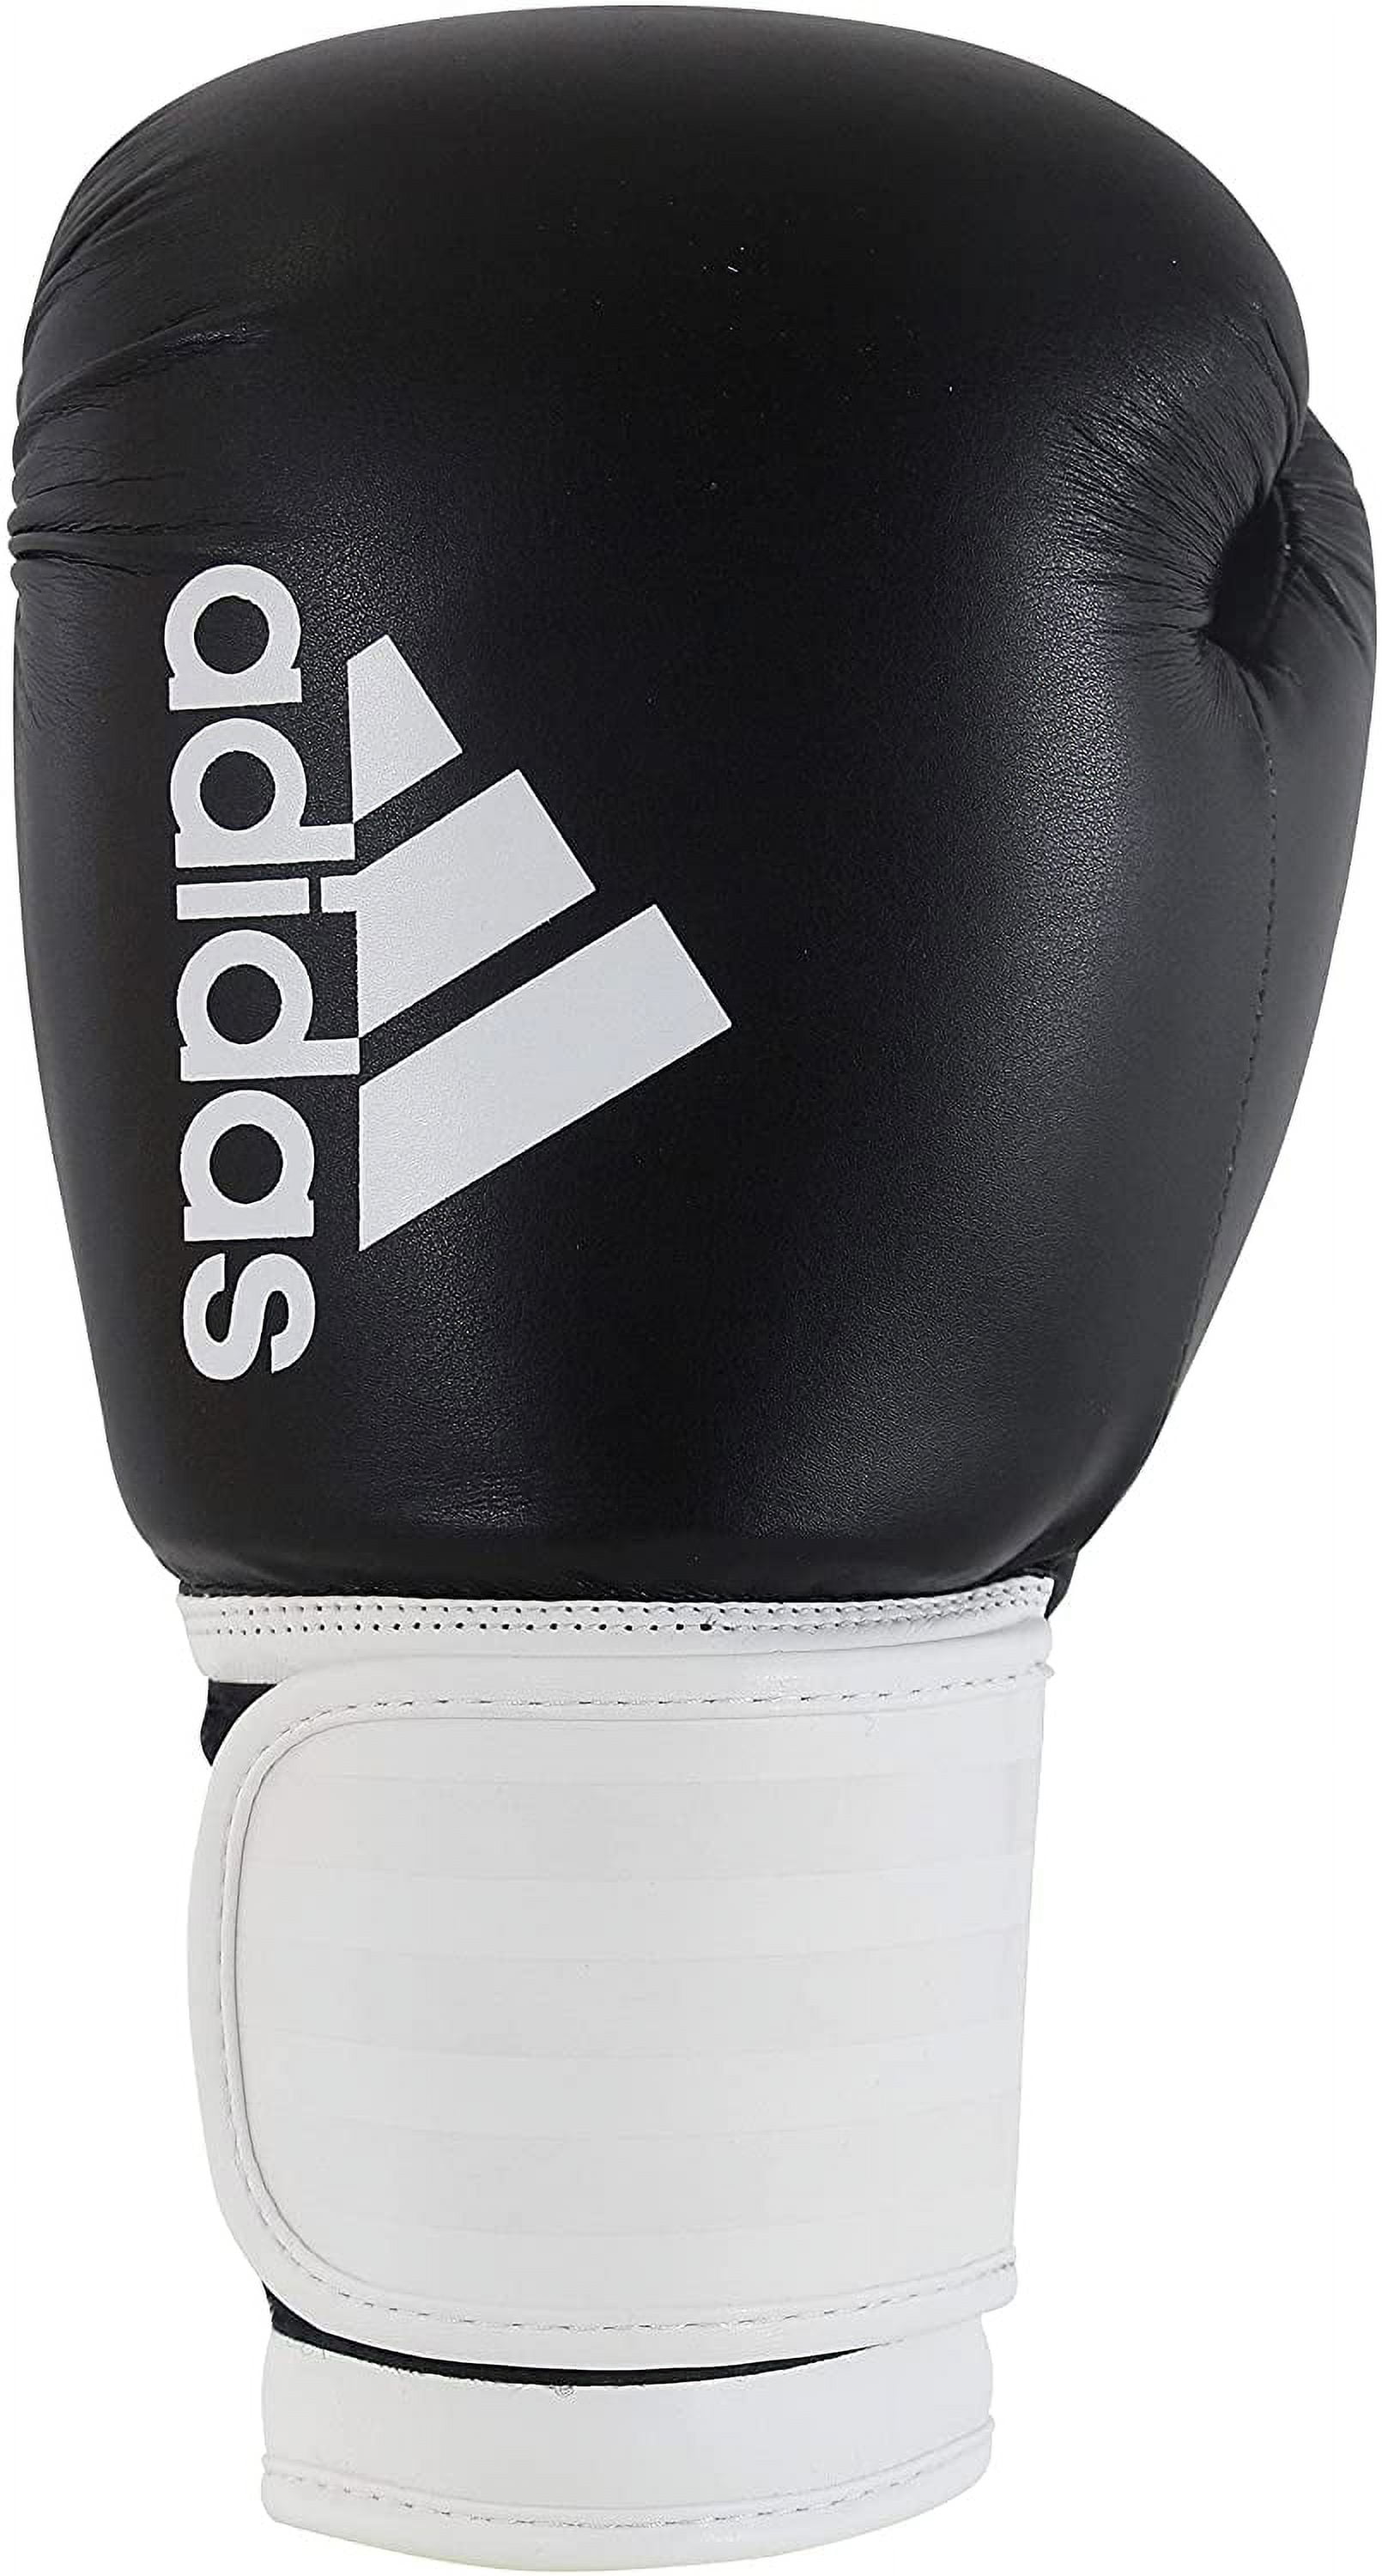 Adidas Boxing and Fitness Black/White, Hybrid Bags Gloves and for - 16oz - - Men Punching, for - and 100 Heavy Women Kickboxing